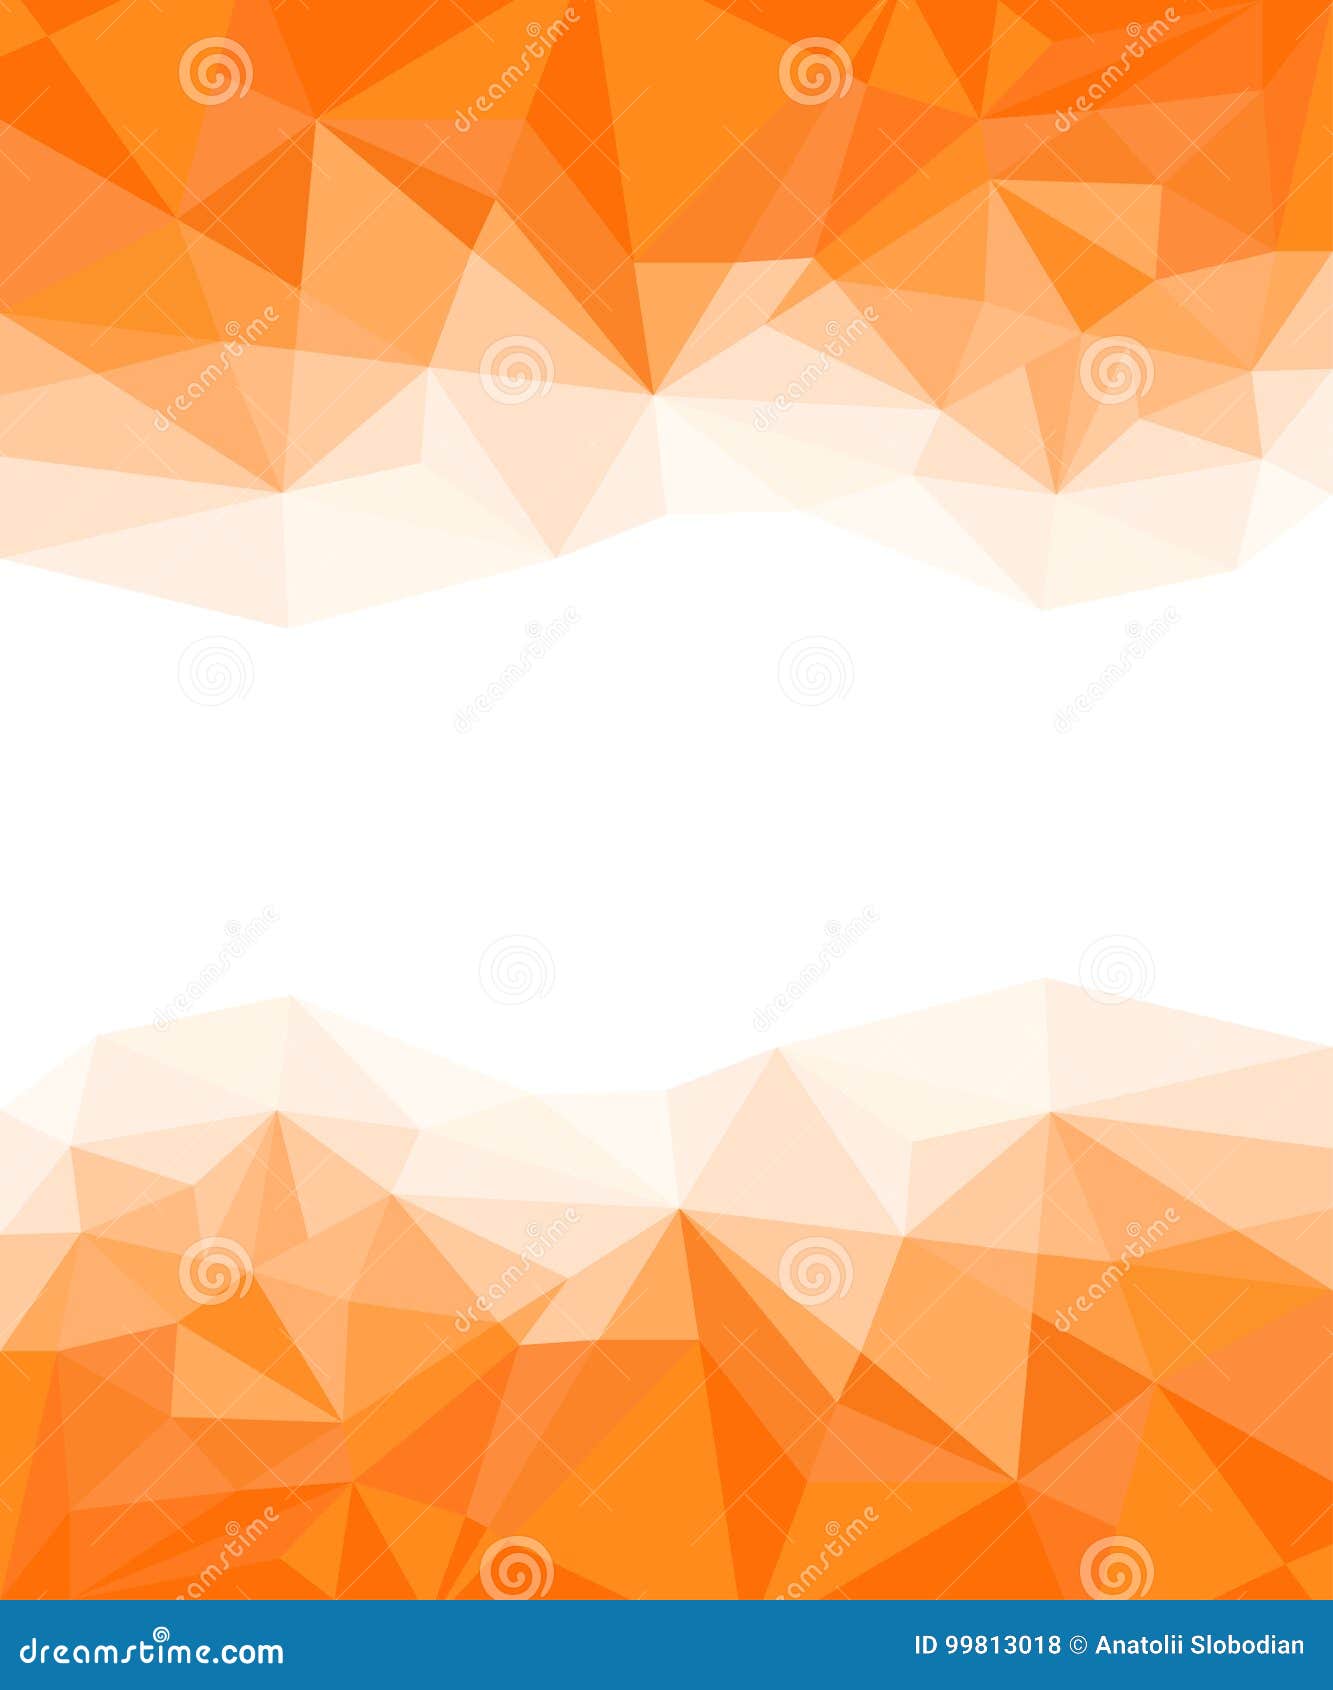 Geometric Orange and White Abstract Vector Background for Use in Design  Stock Vector - Illustration of mosaic, concept: 99813018